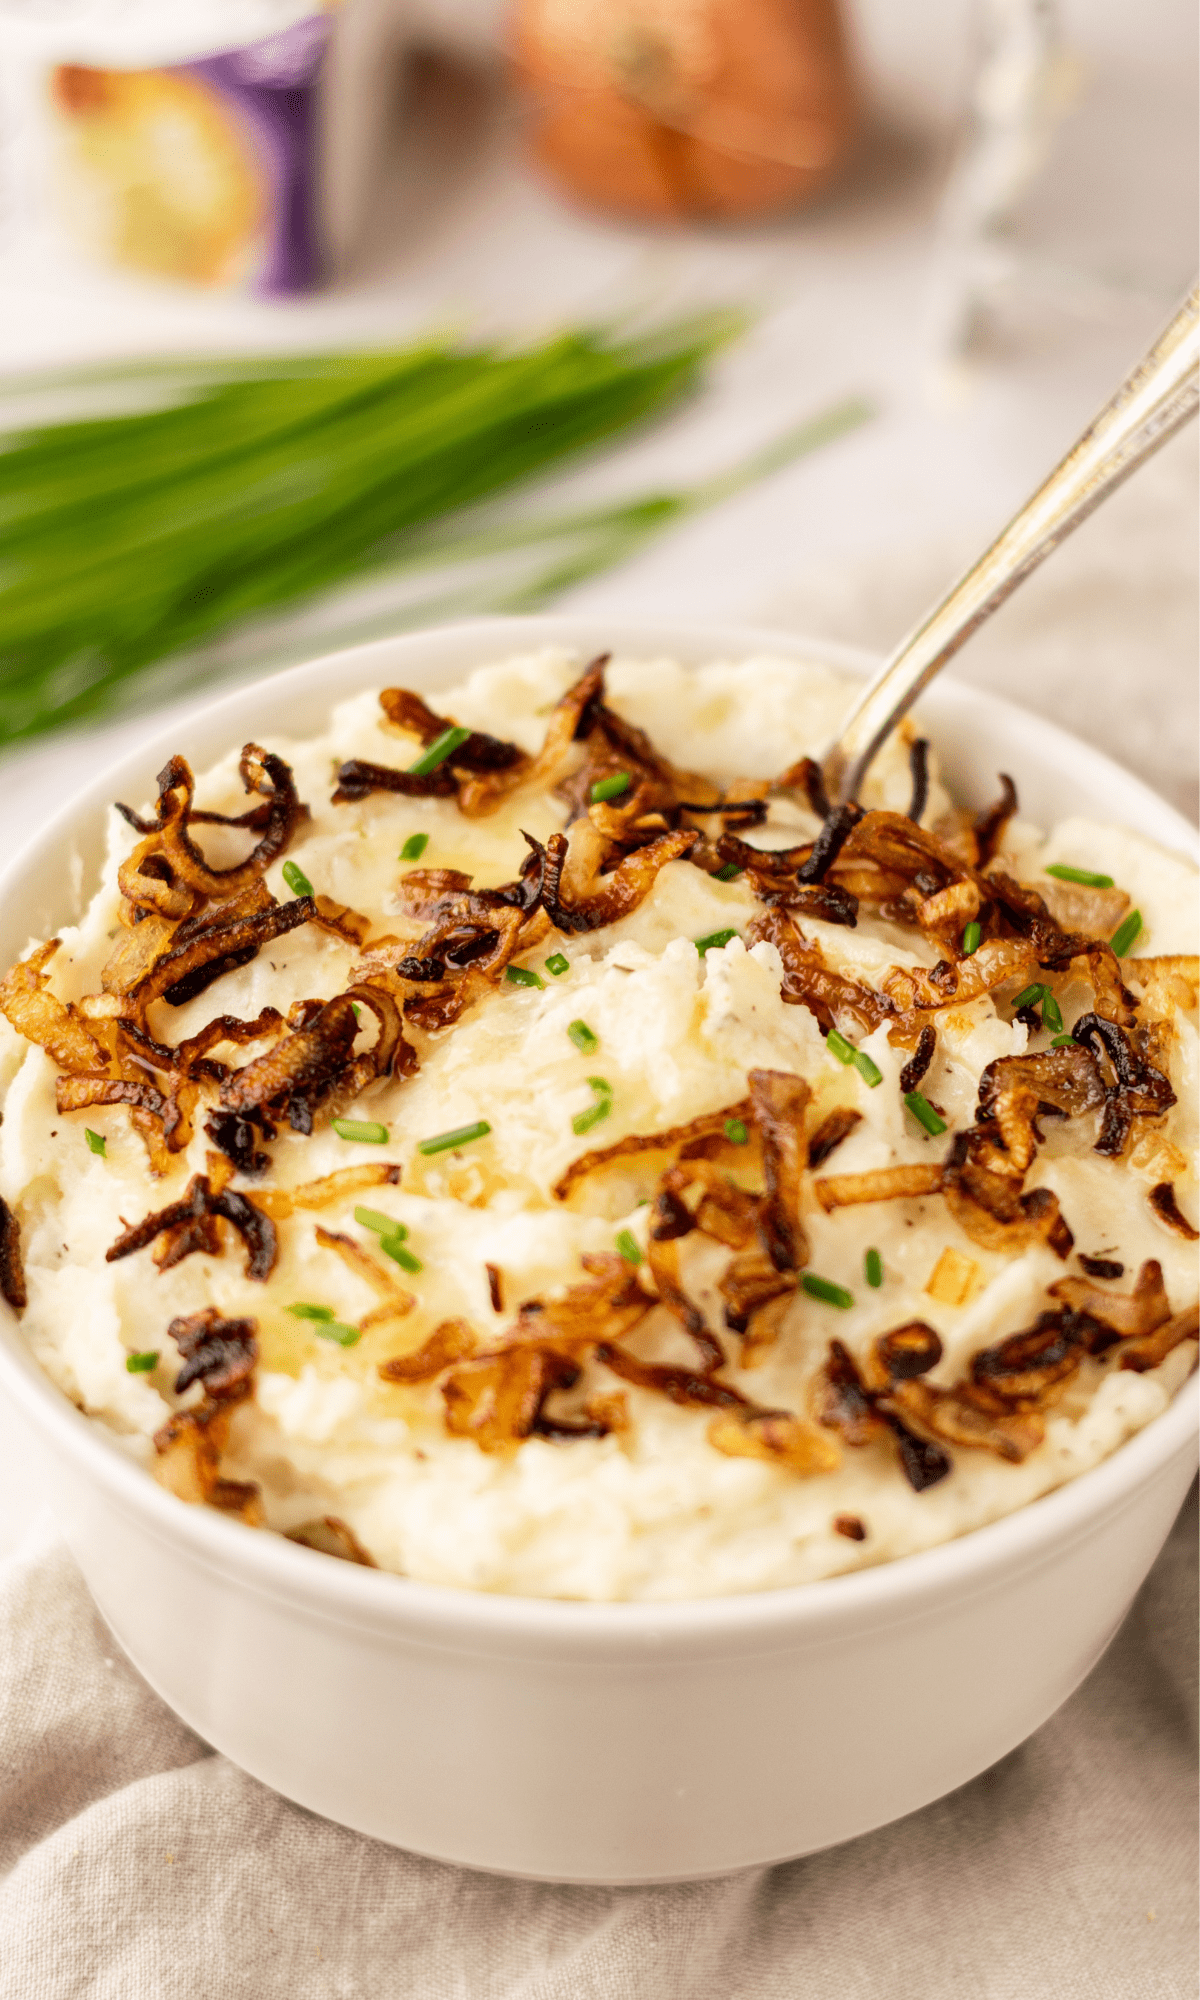 Boursin Mashed Potatoes with crispy shallots in a white bowl.